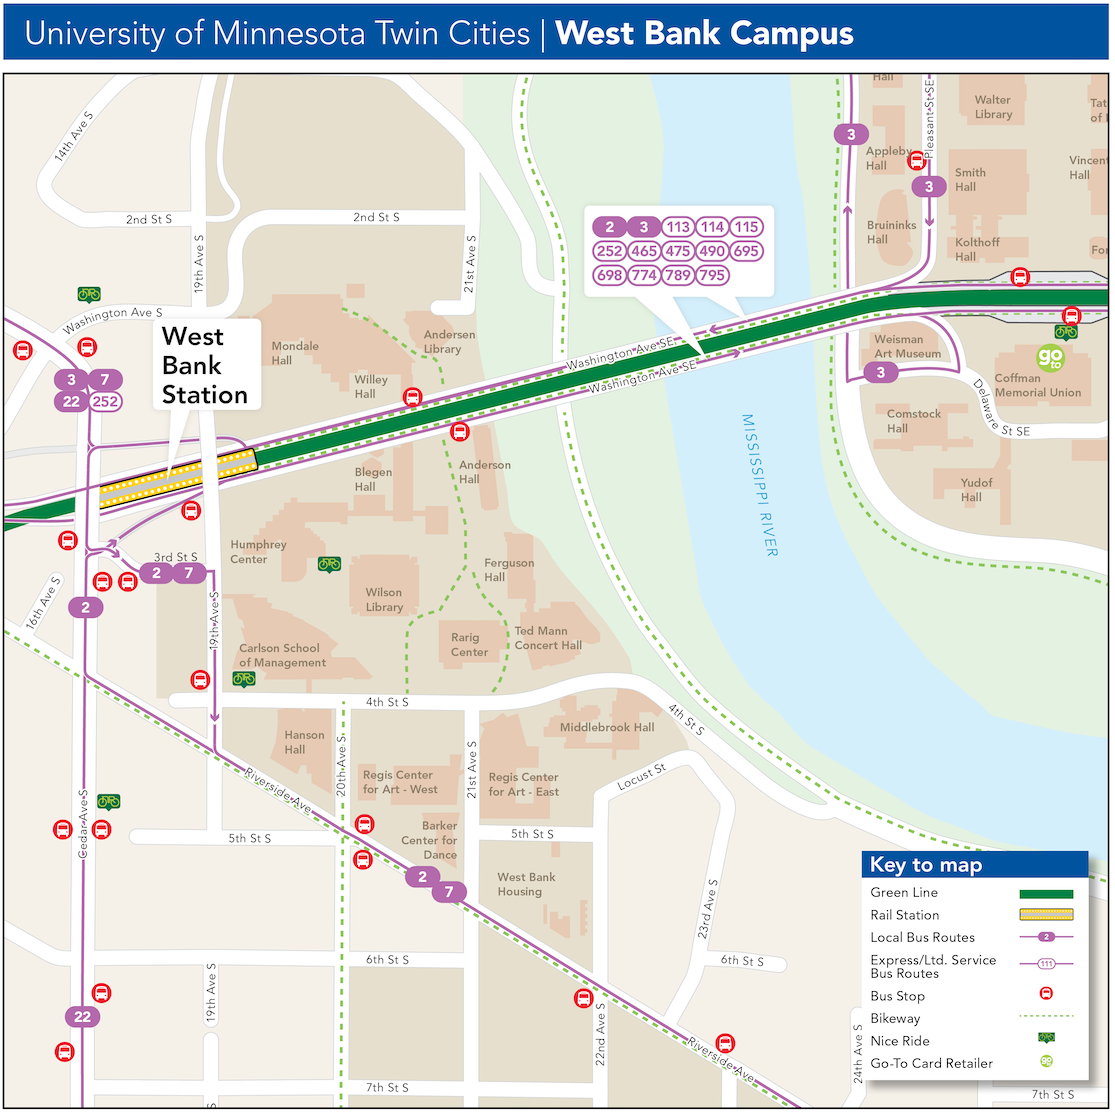 West Bank Campus map